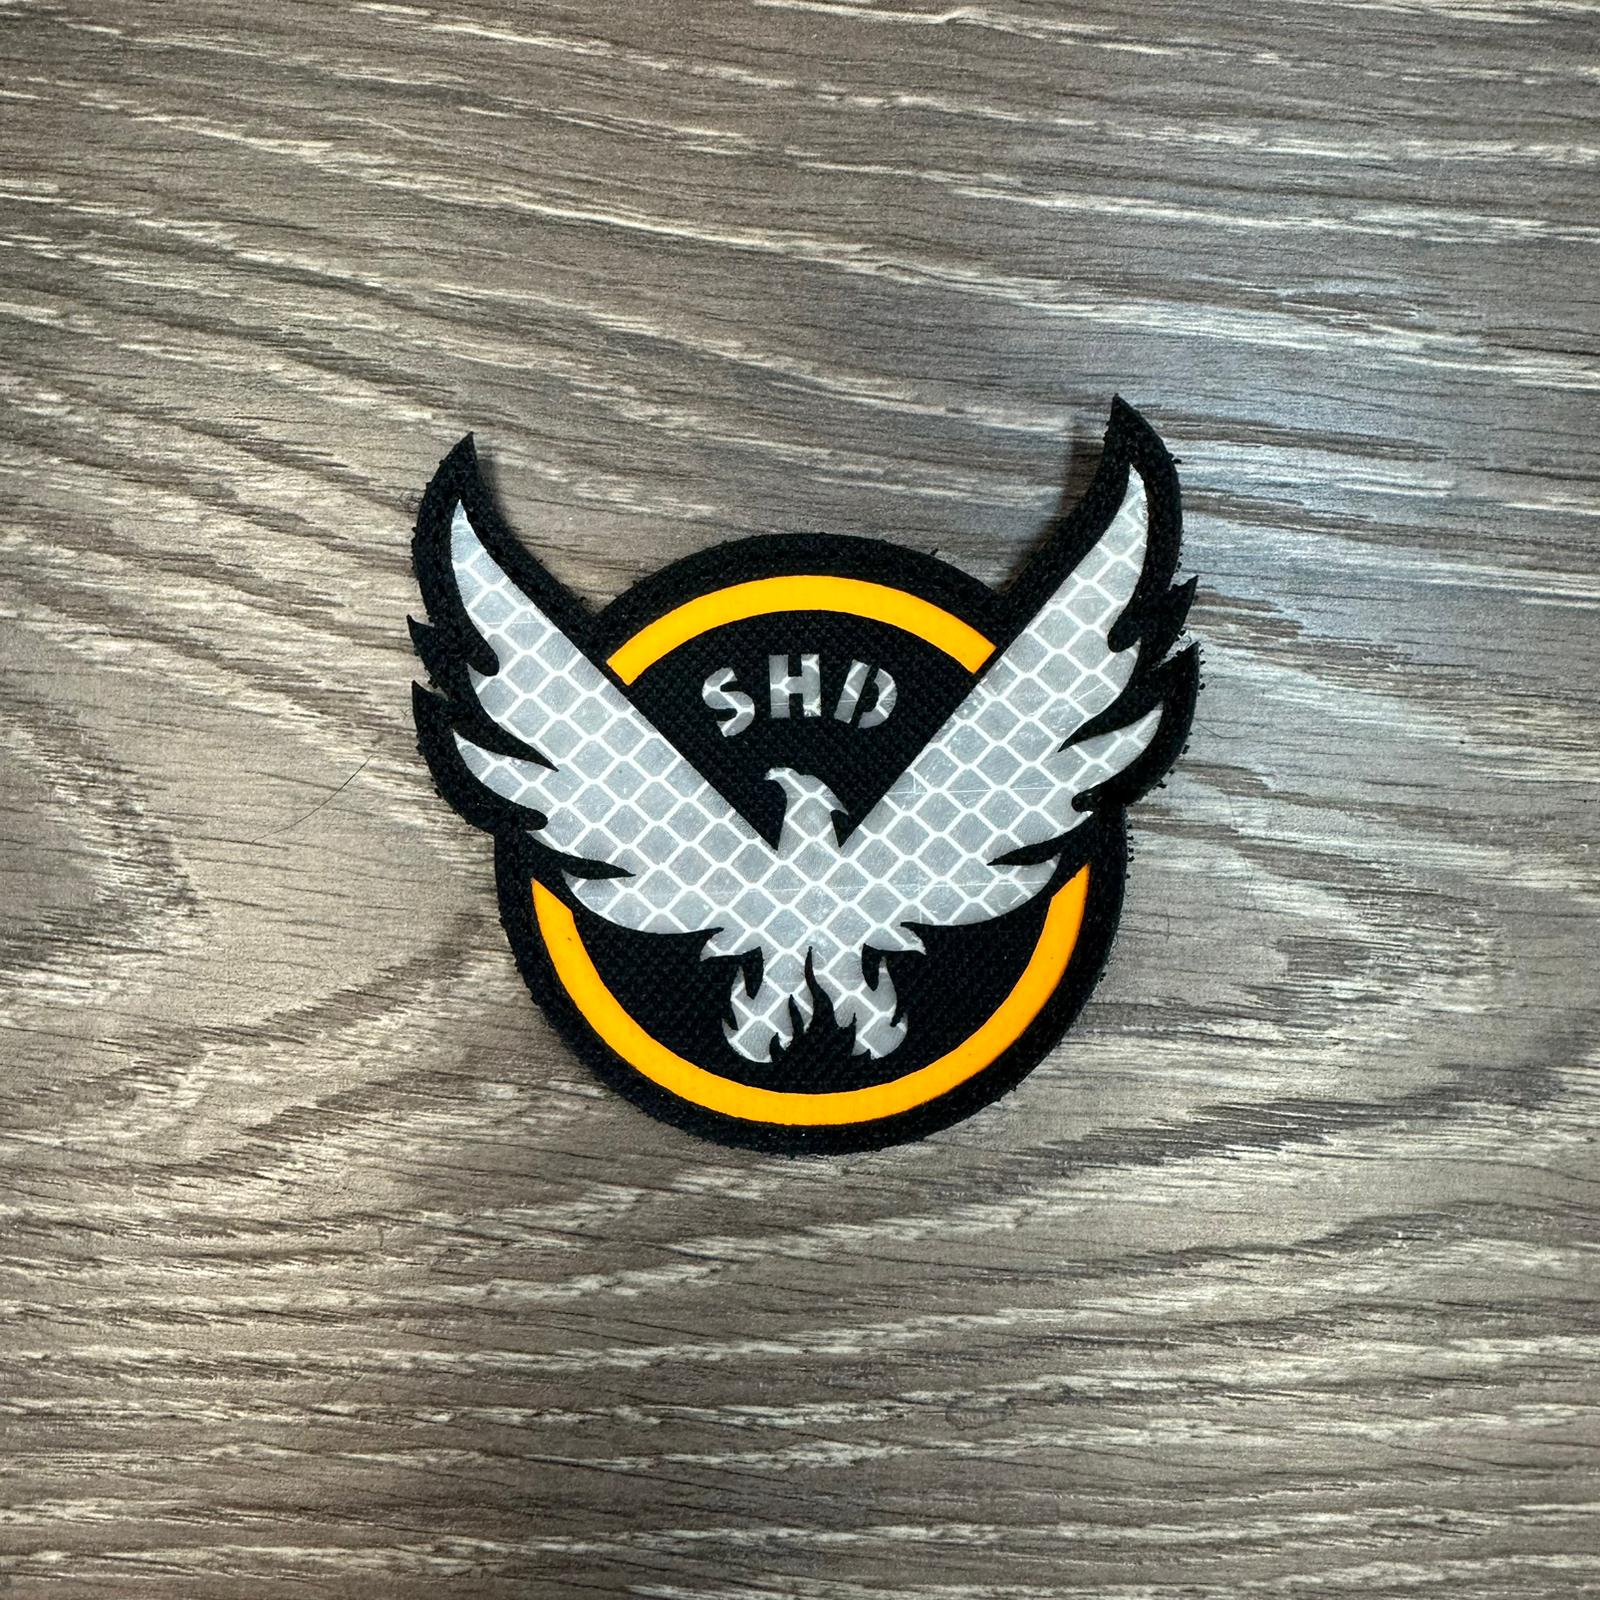 The Division SHD Reflective Velcro Patch